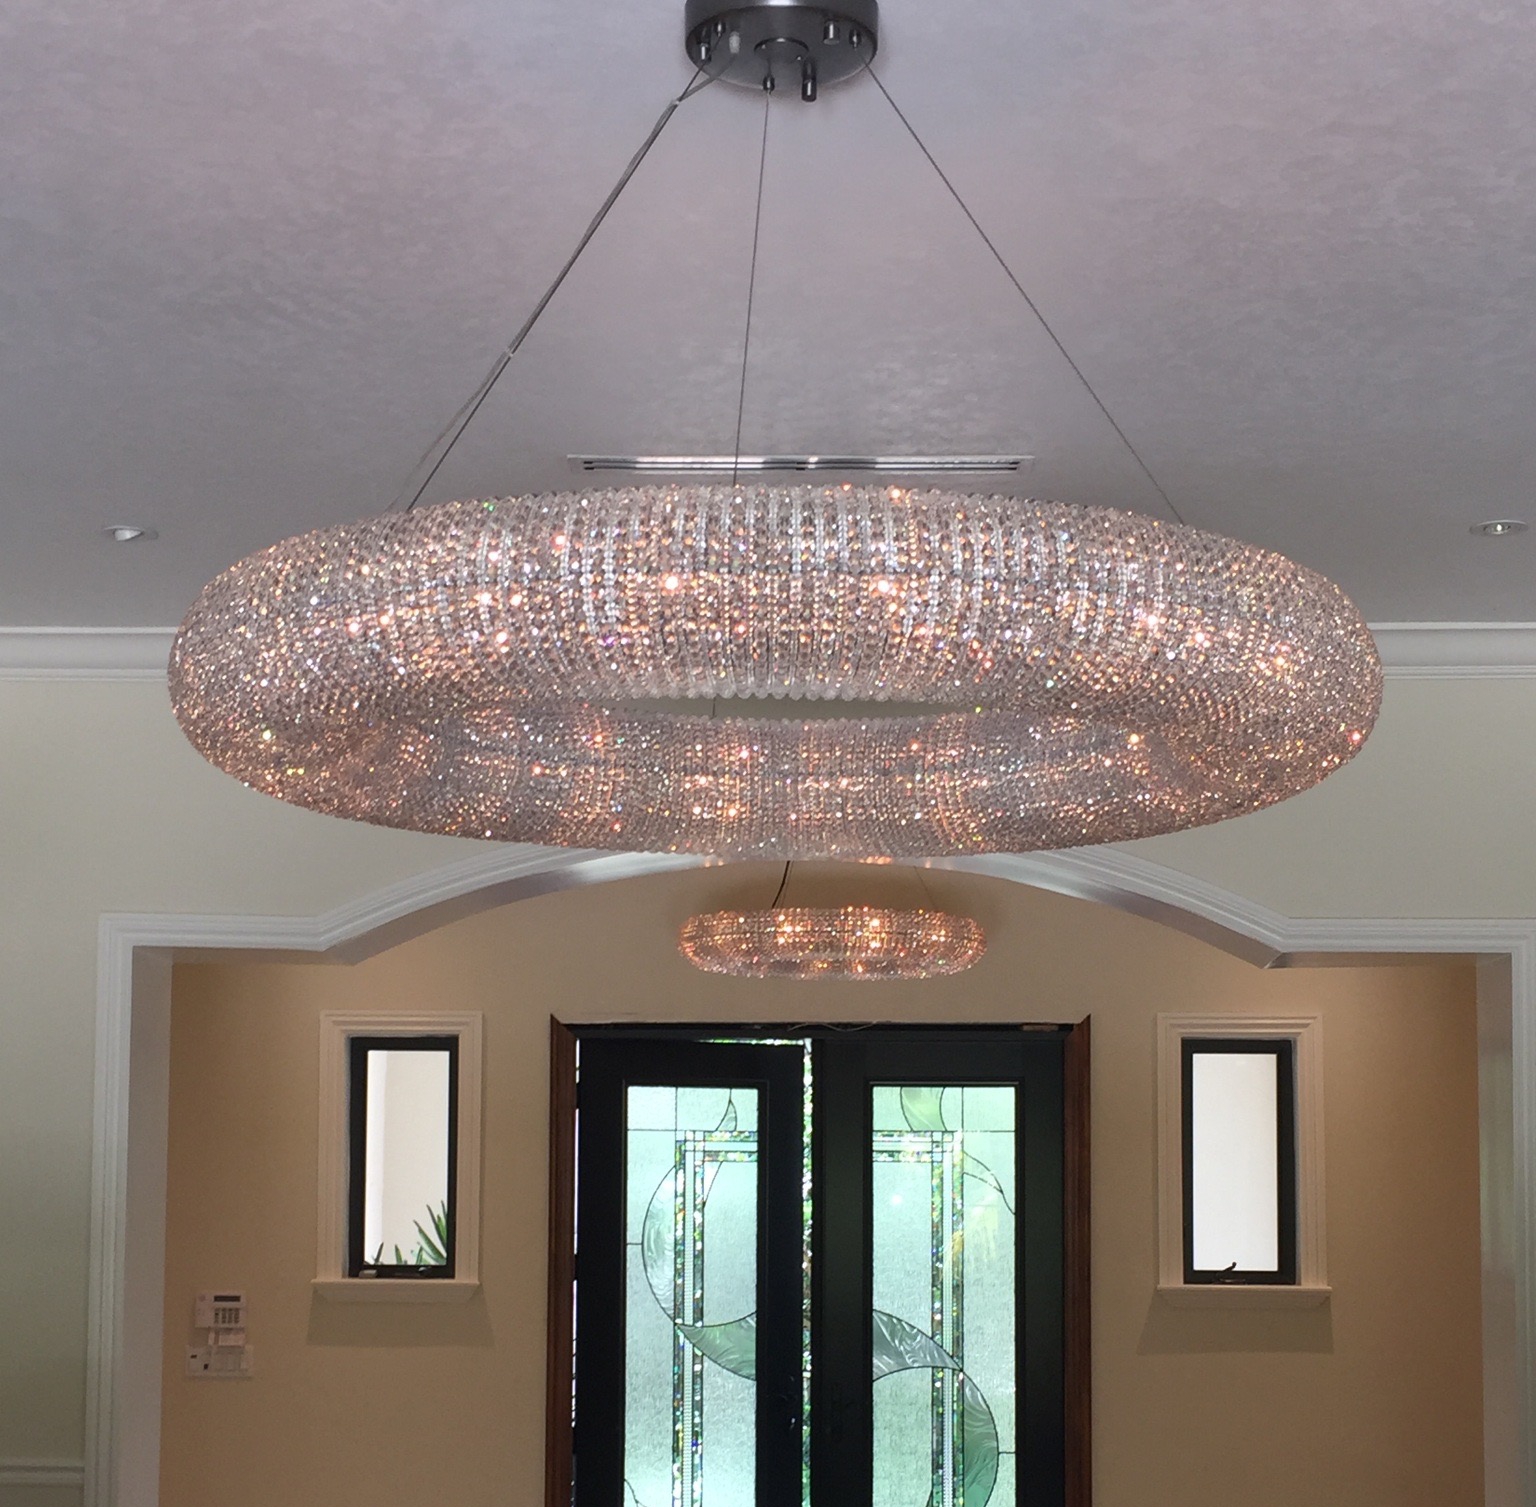 A large torus shaped light hung in the ceiling of a home's foyer.